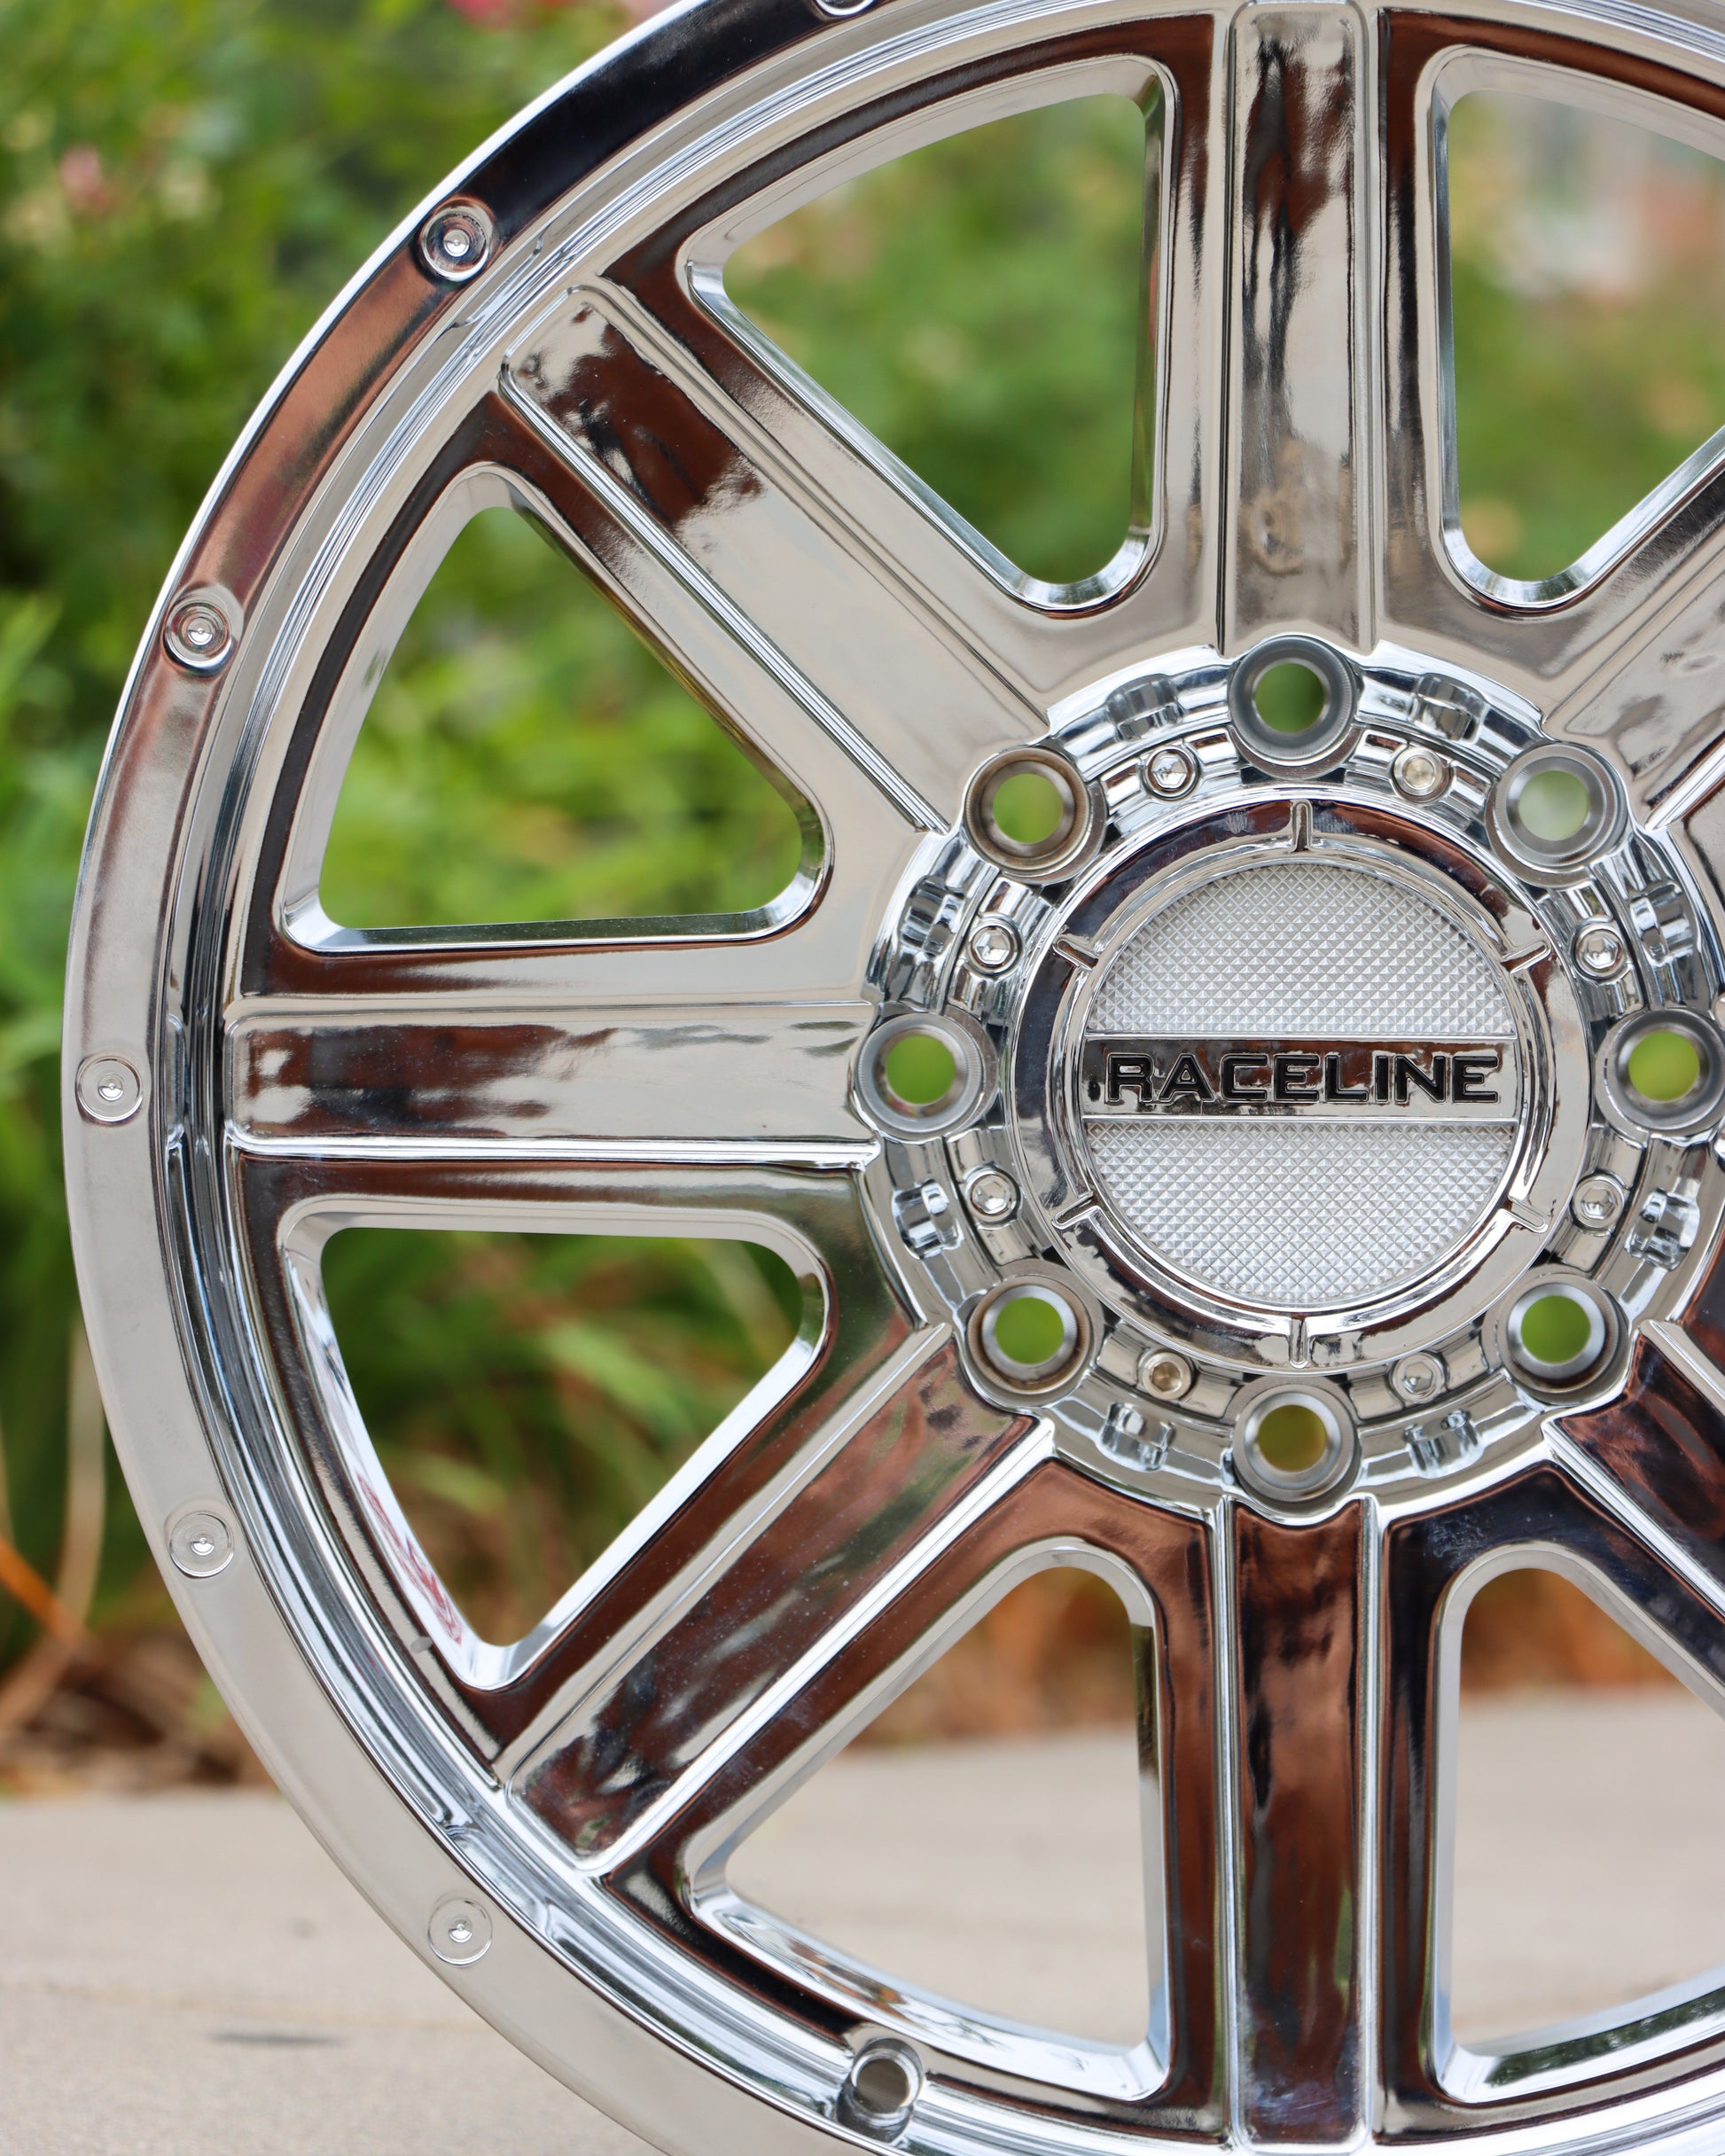 close-up view of the raceline hostage wheel in a chrome finish with bushes in the background.